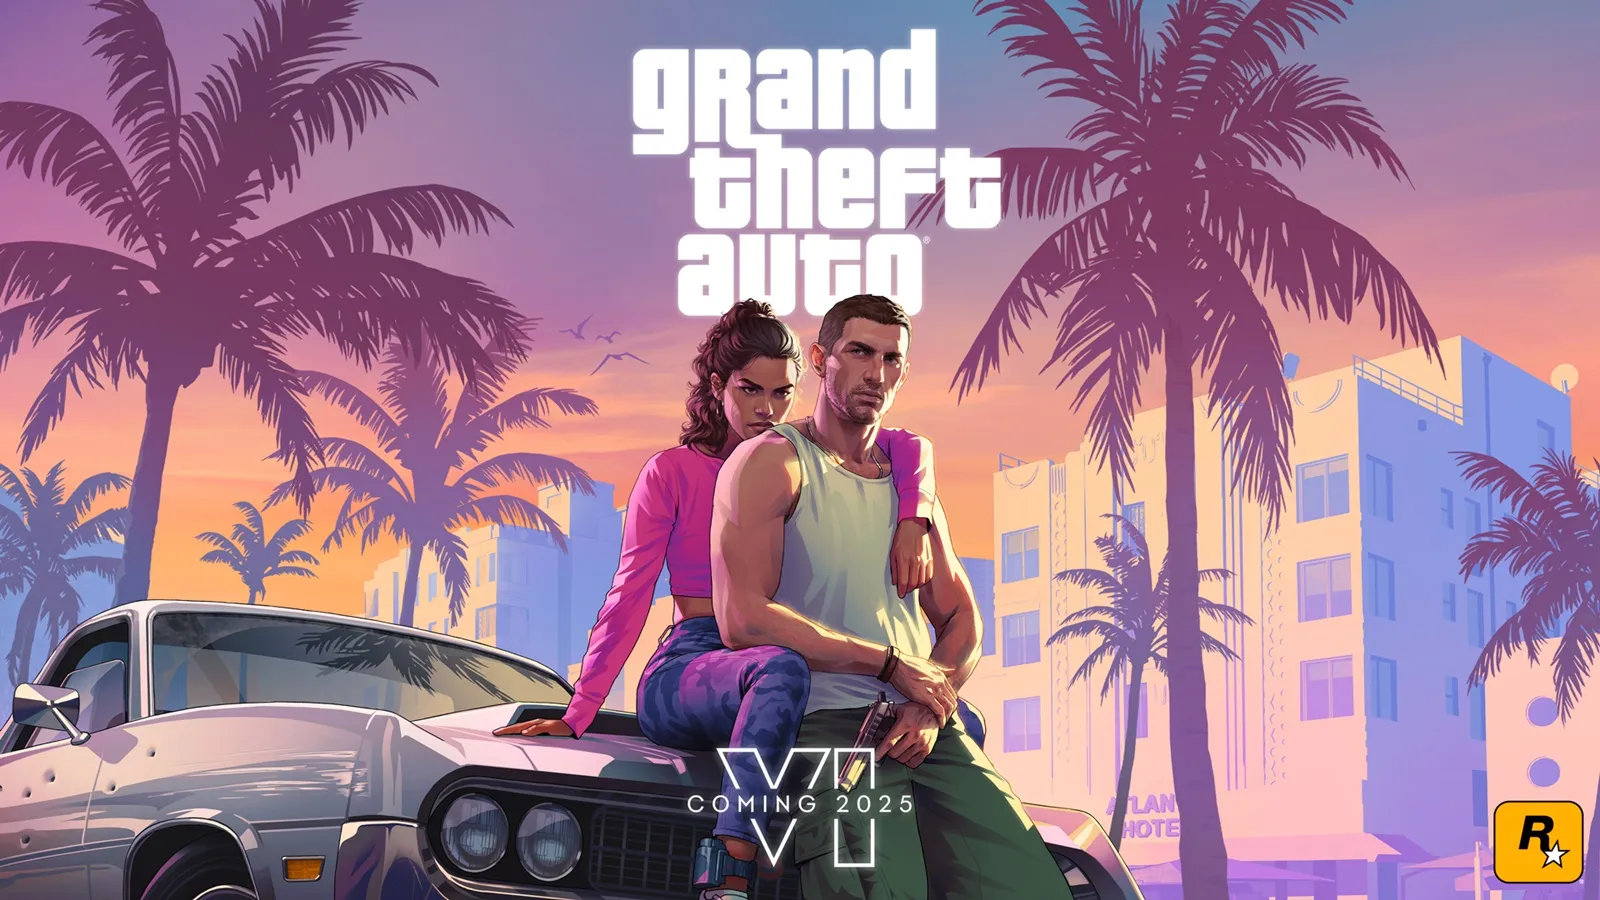 Grand Theft Auto 6 first trailer is here, and it's coming out in